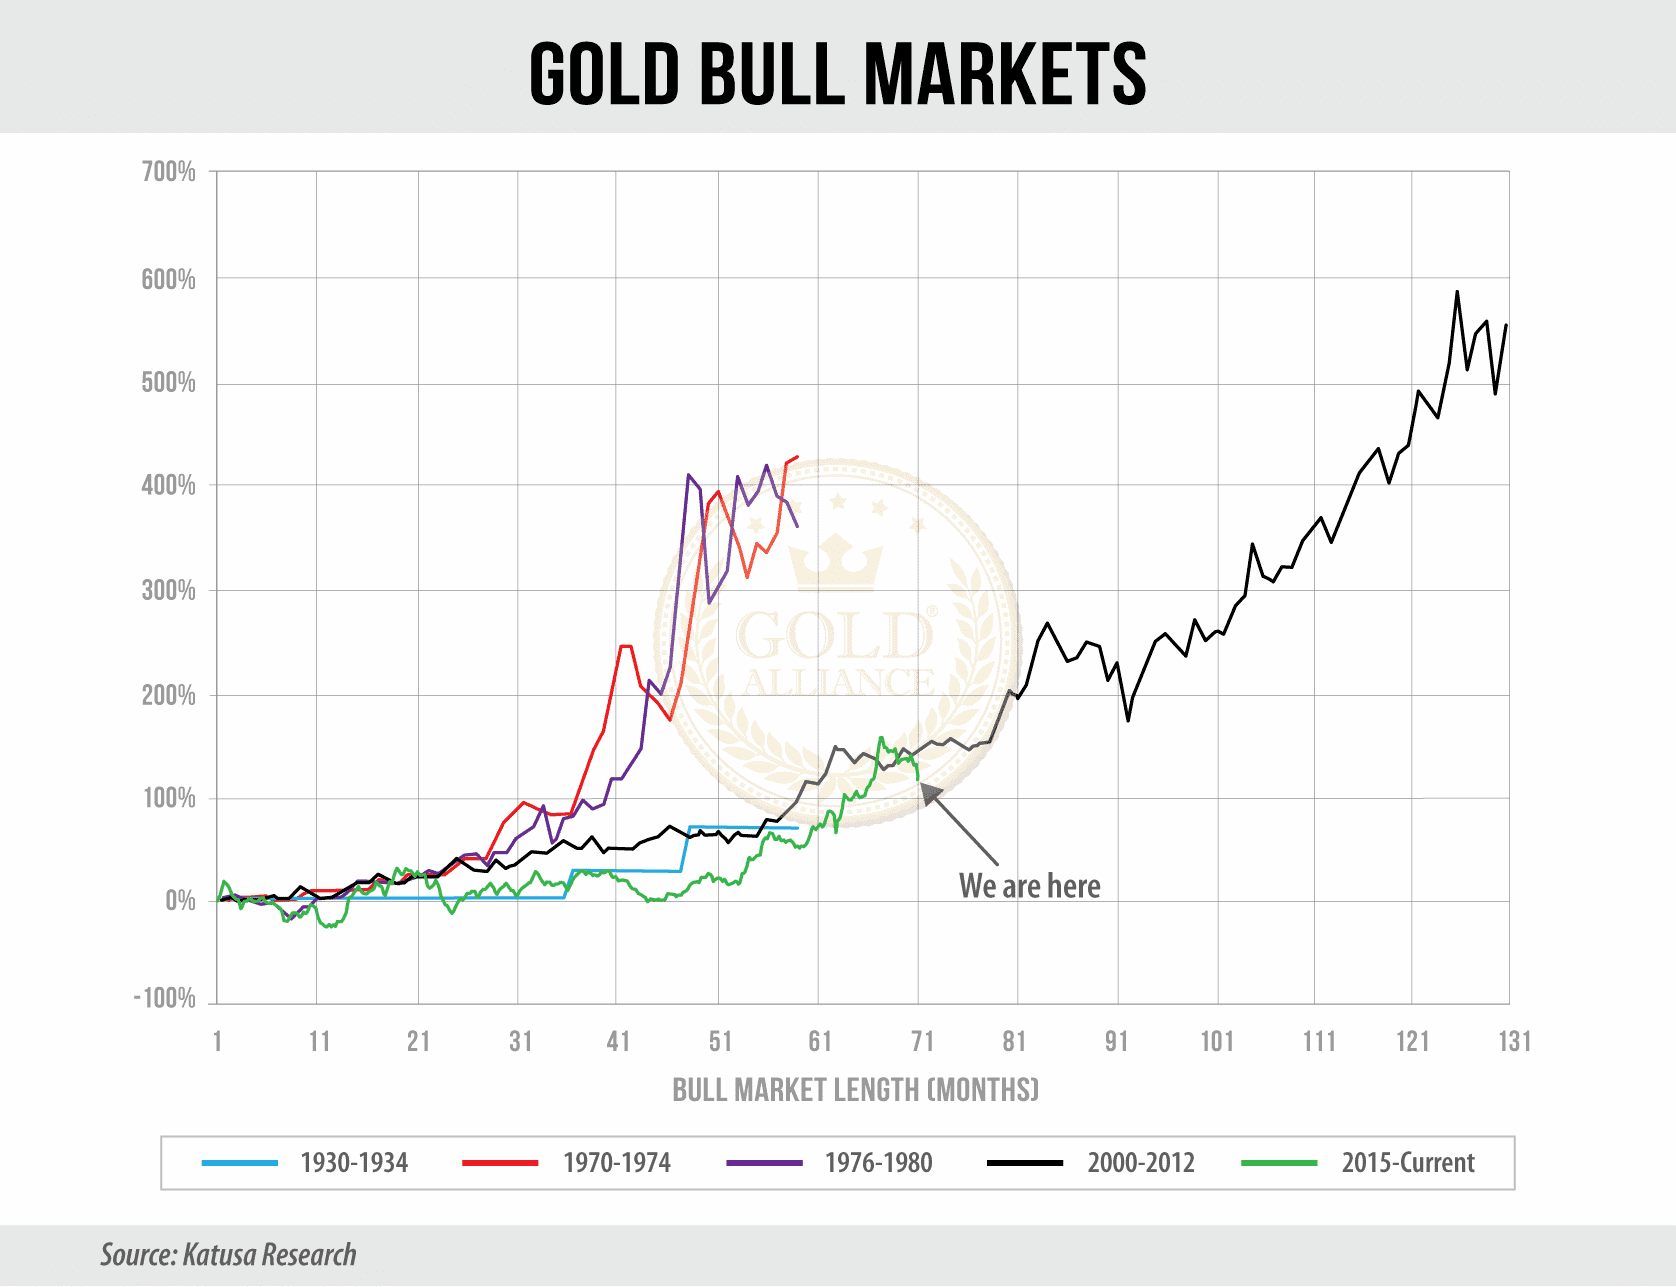 The current gold bull market is most likely going to continue as part of the commodities supercycle.